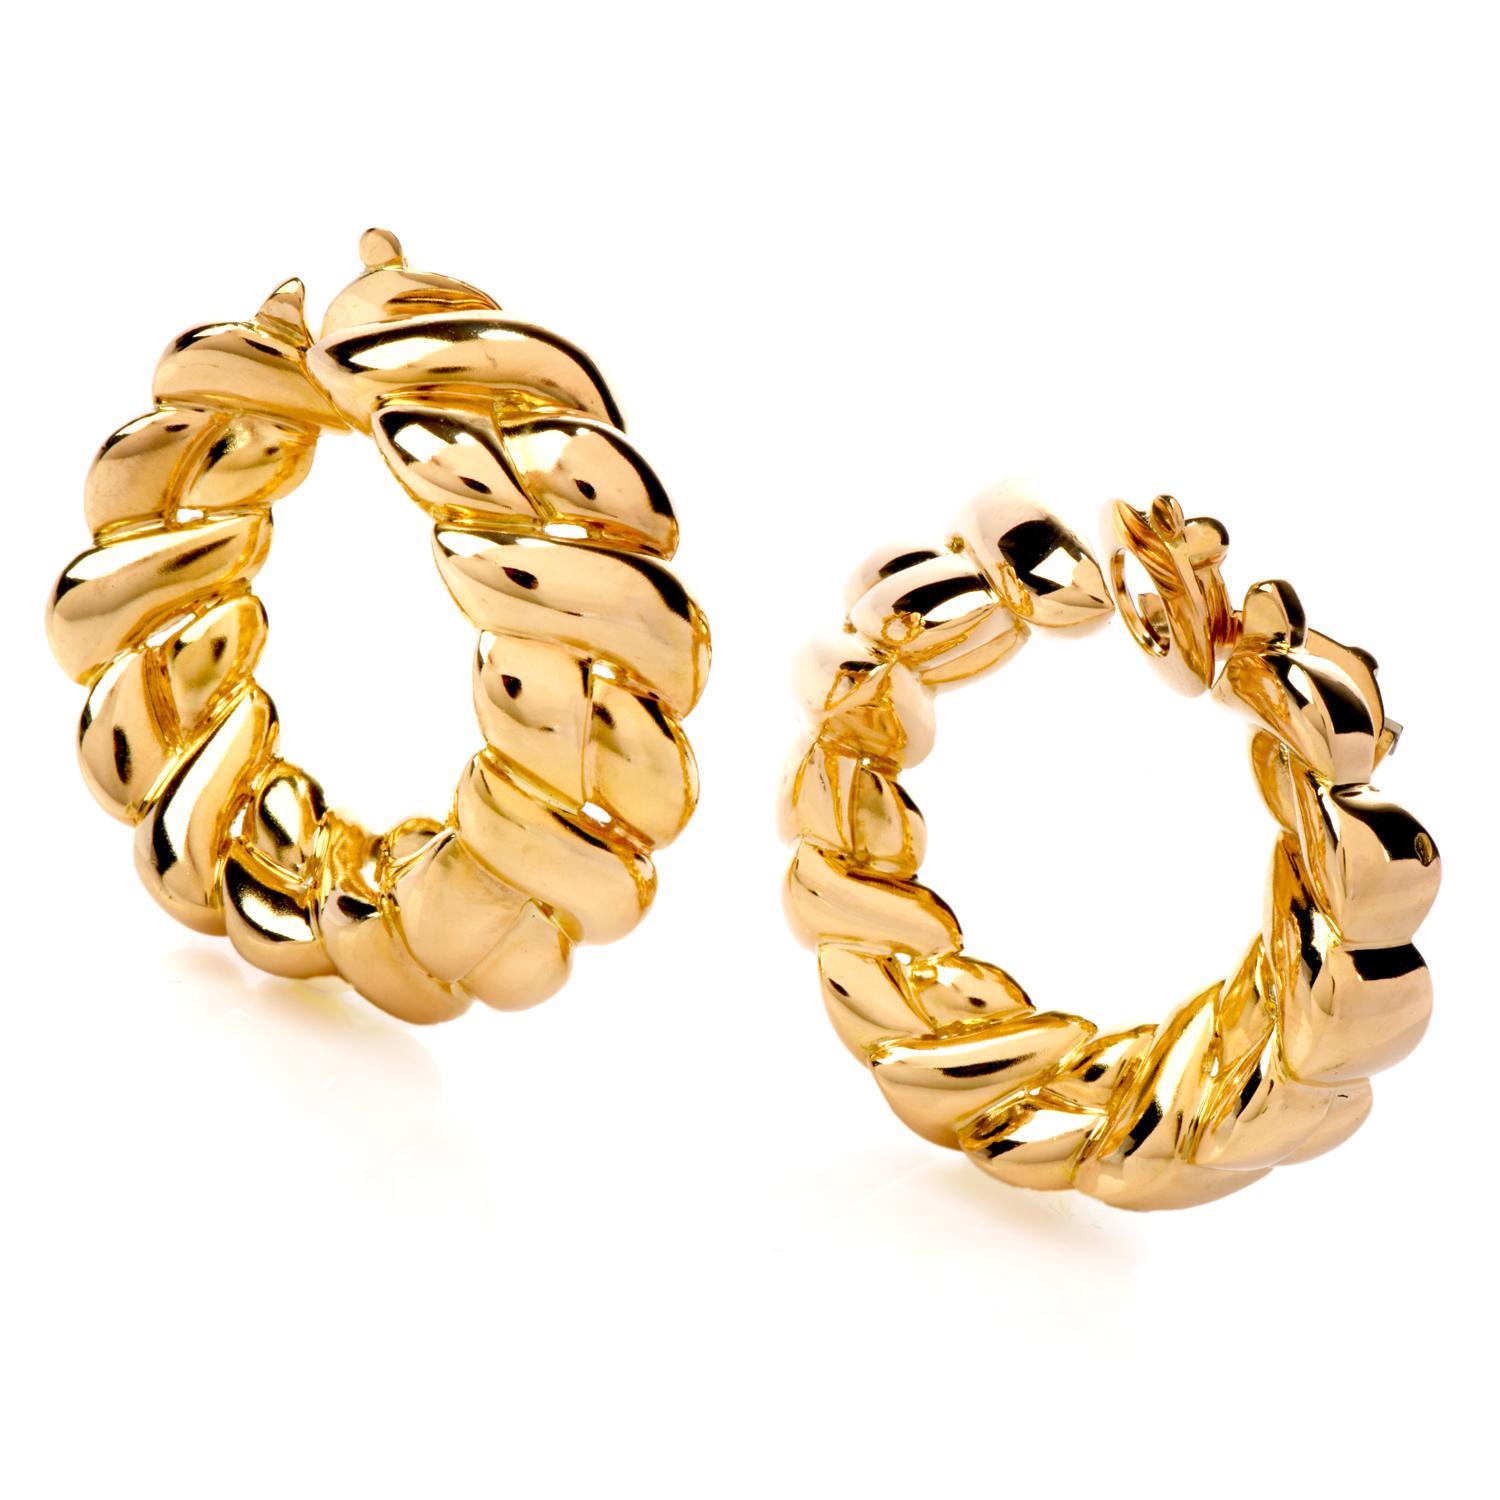 These earrings will be sure to make you feel glamorous, like Sofia Loren, vacationing on the Amalfi Coast. 

These Van Cleef & Arpels 18K Yellow Gold Clip-On Earrings are notable at 30.6 grams with a 30 x 30-millimeter spread. 

These 18-karat